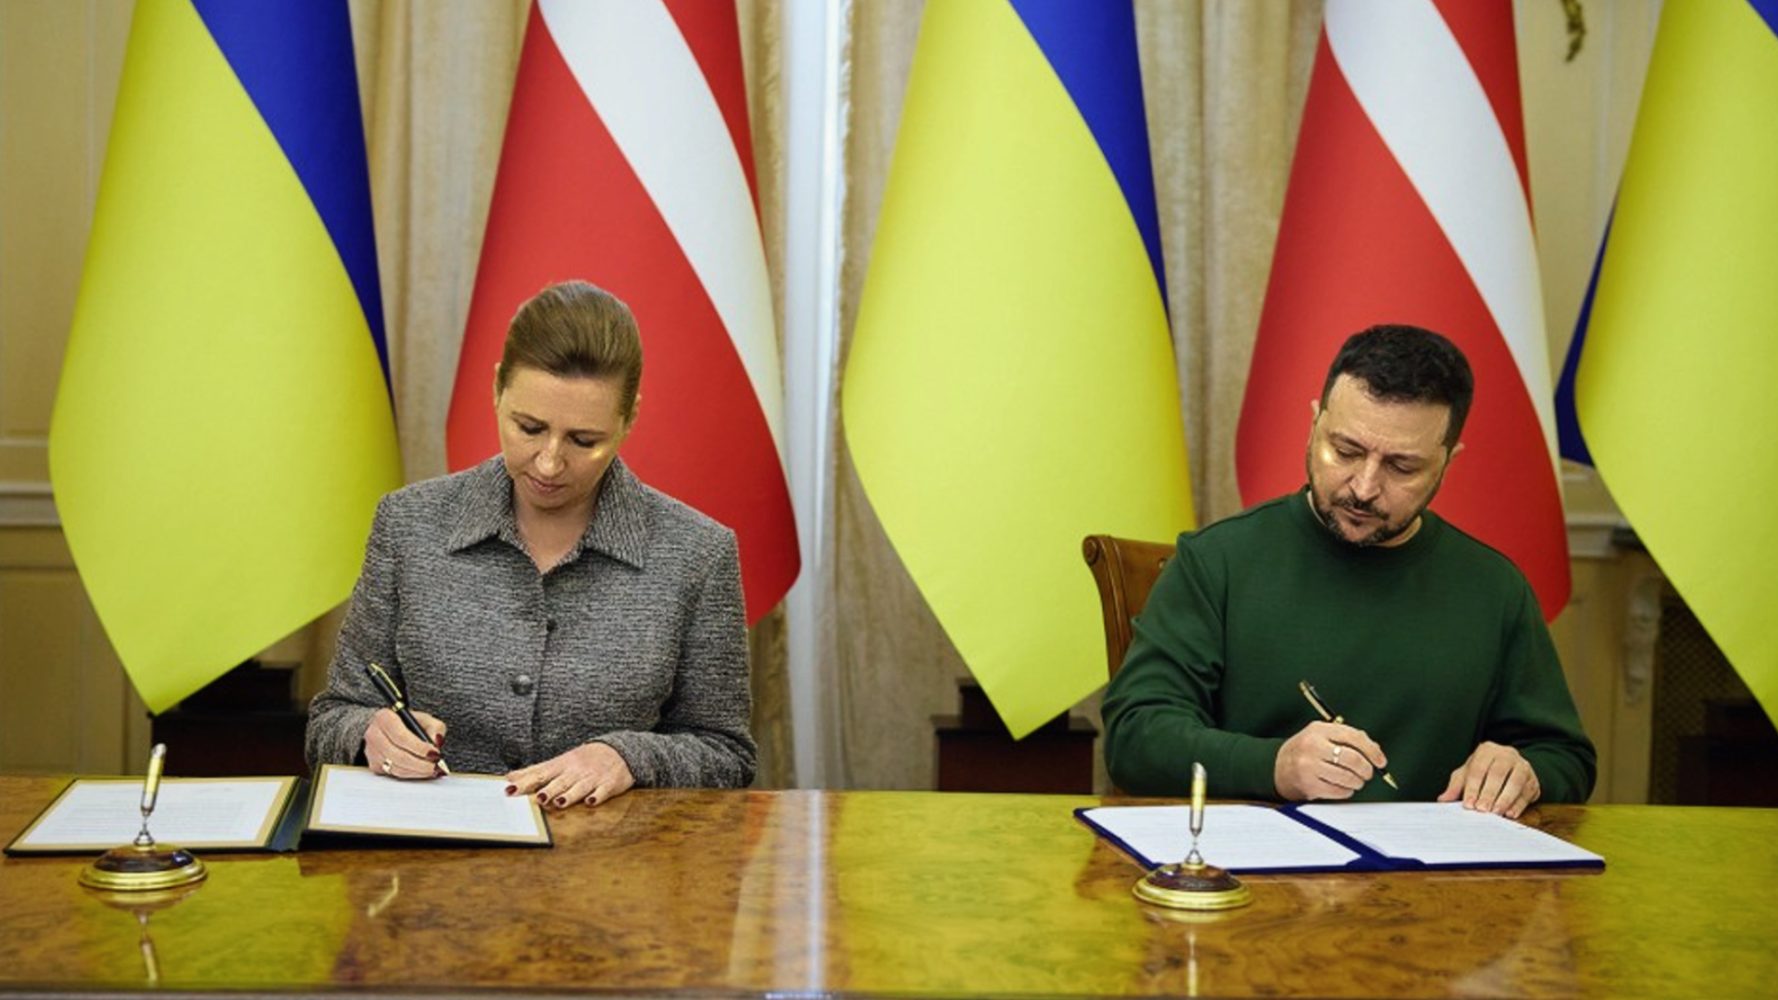 Ukraine and Denmark sign an agreement for security